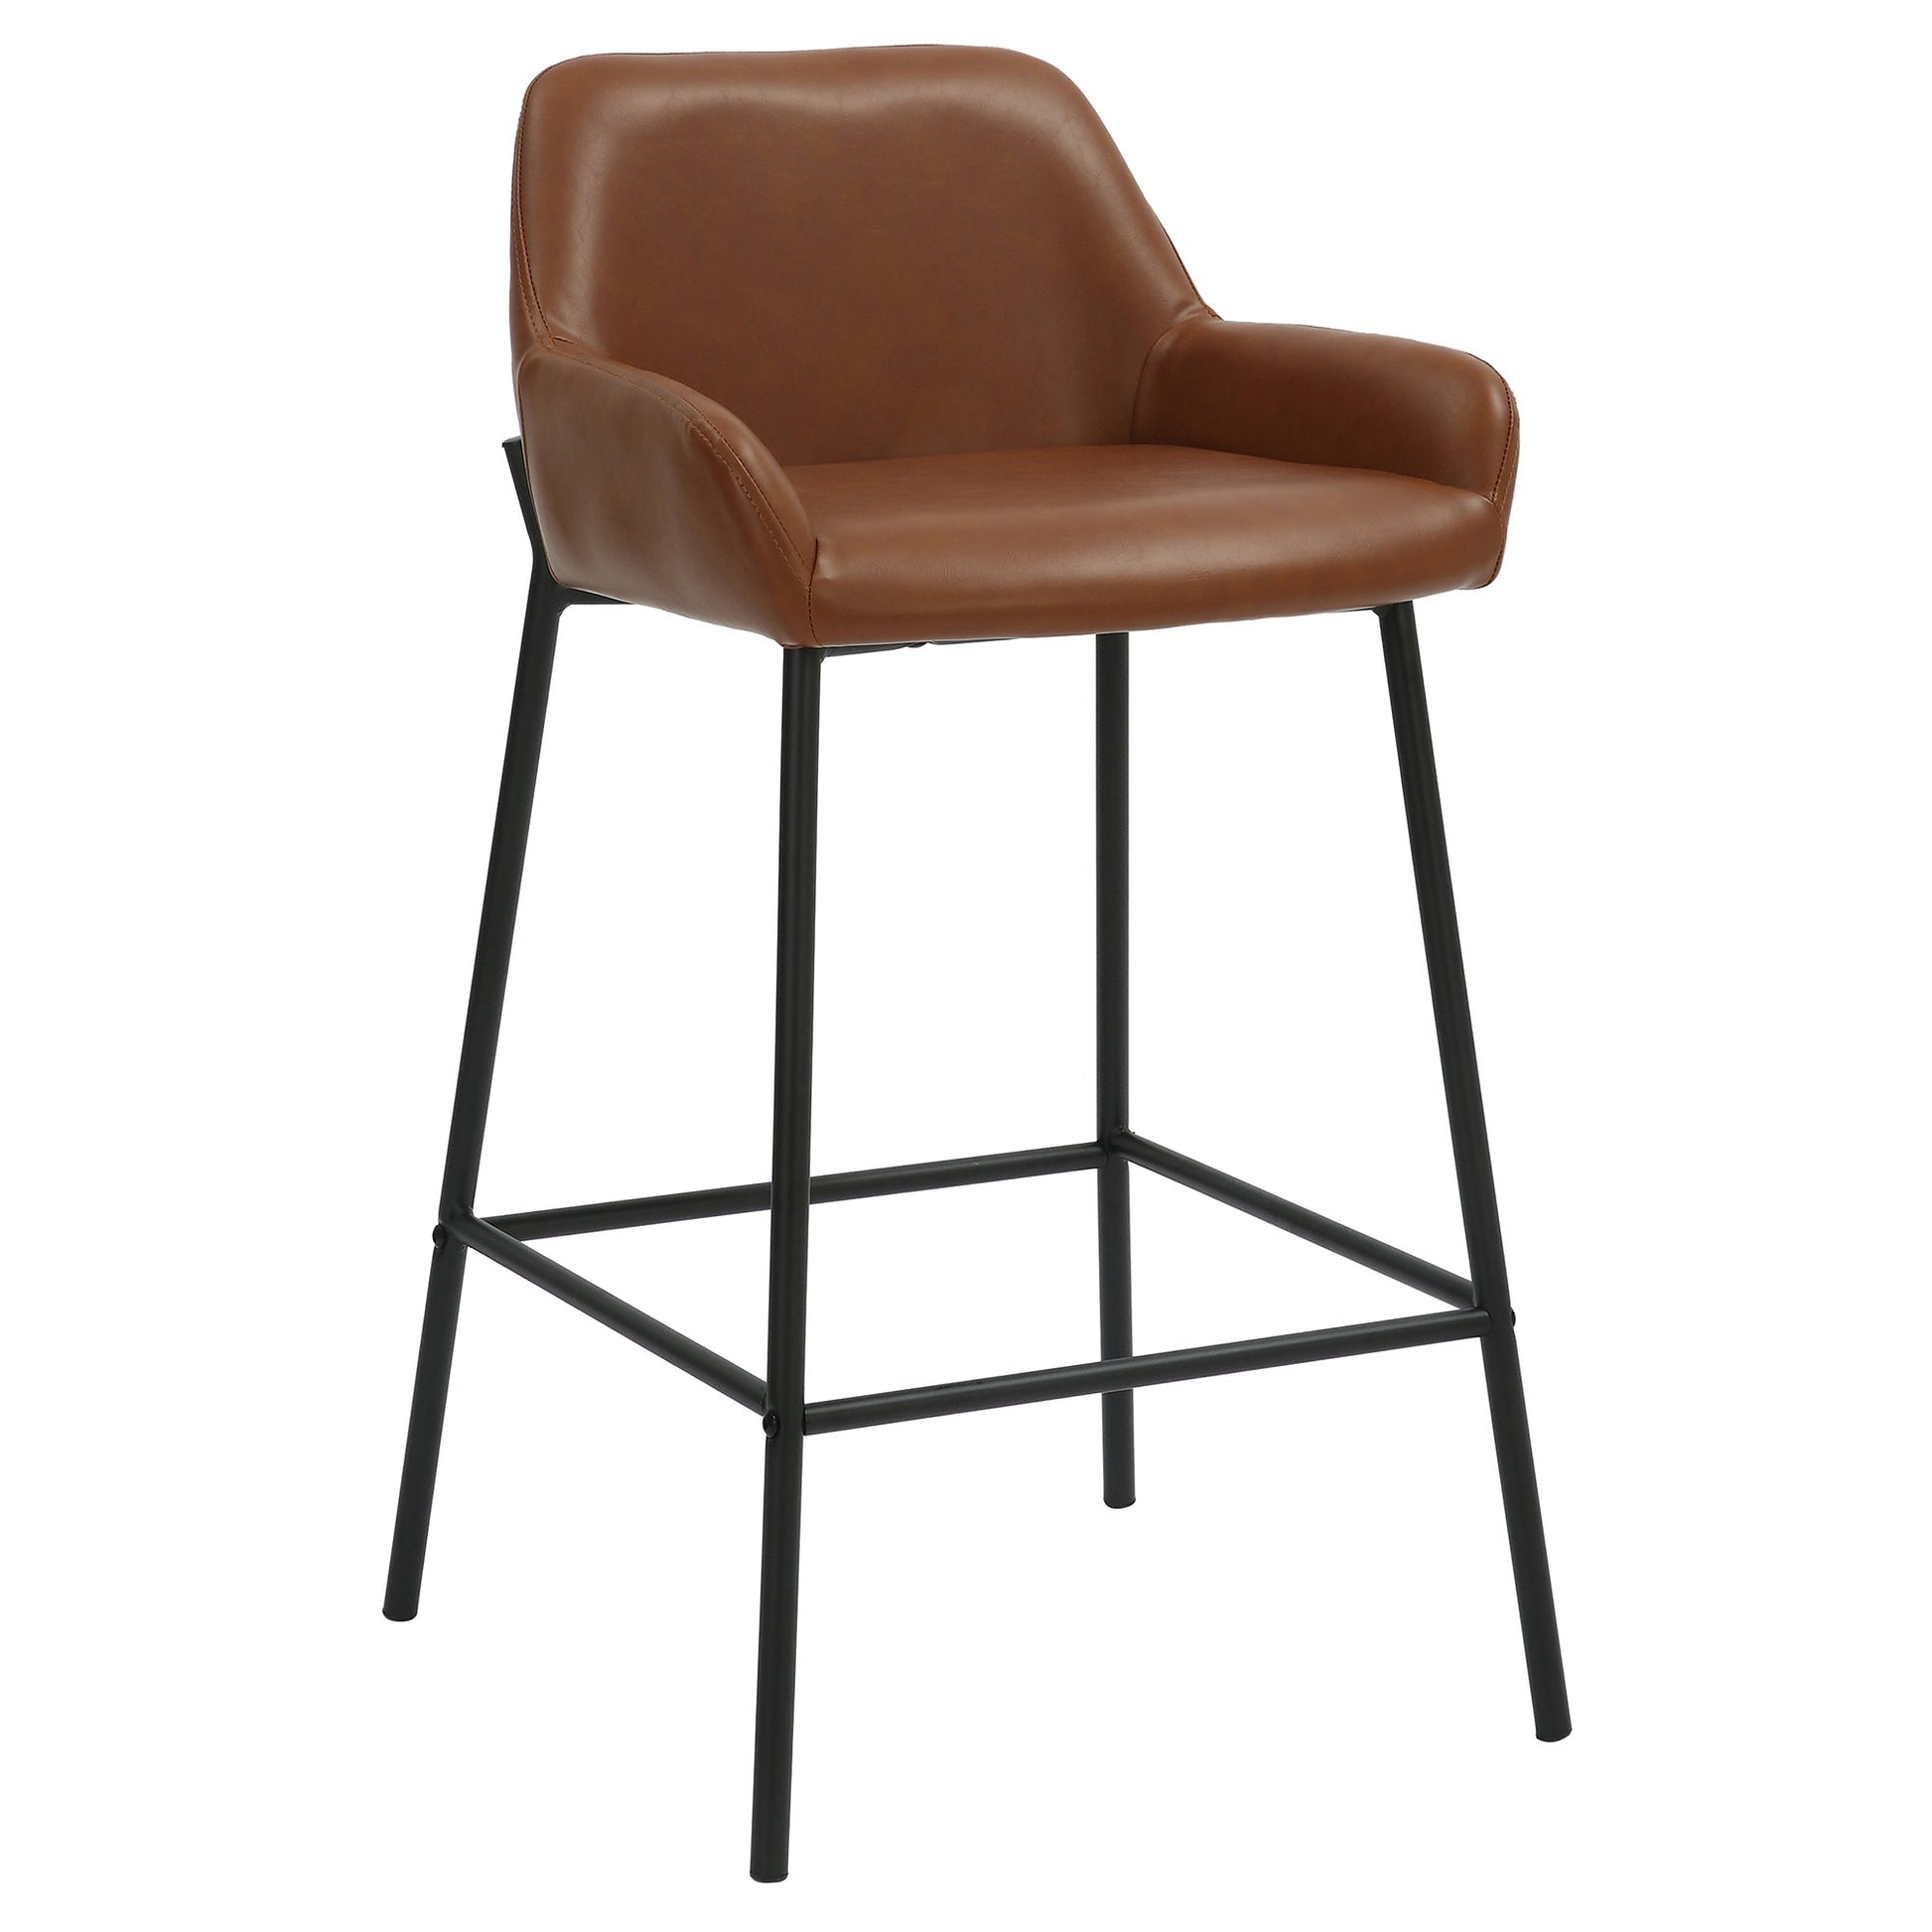 26 inch Bar Stools | Sets of 2 | Baily Caramel and Black - Your Bar Stools Canada